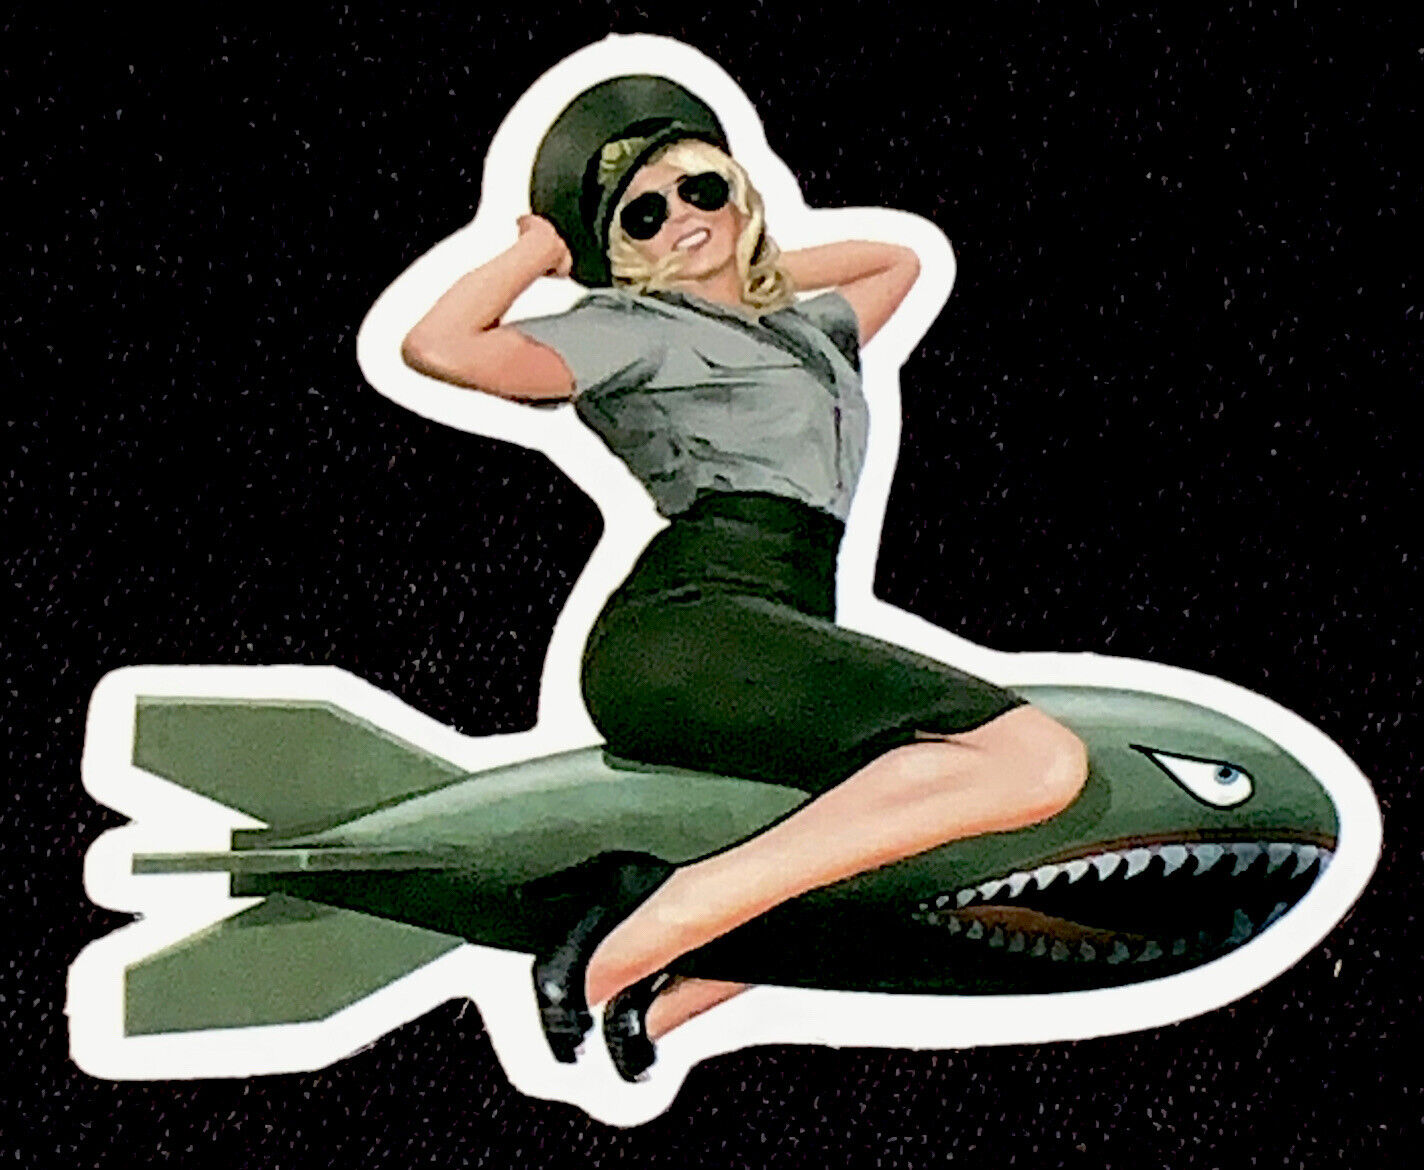 Sexy Pinup Girl Sticker ✨💋🕶💋🕶💋✨2 1/4”x 2” ✨💚🖤✨AWESOME✨